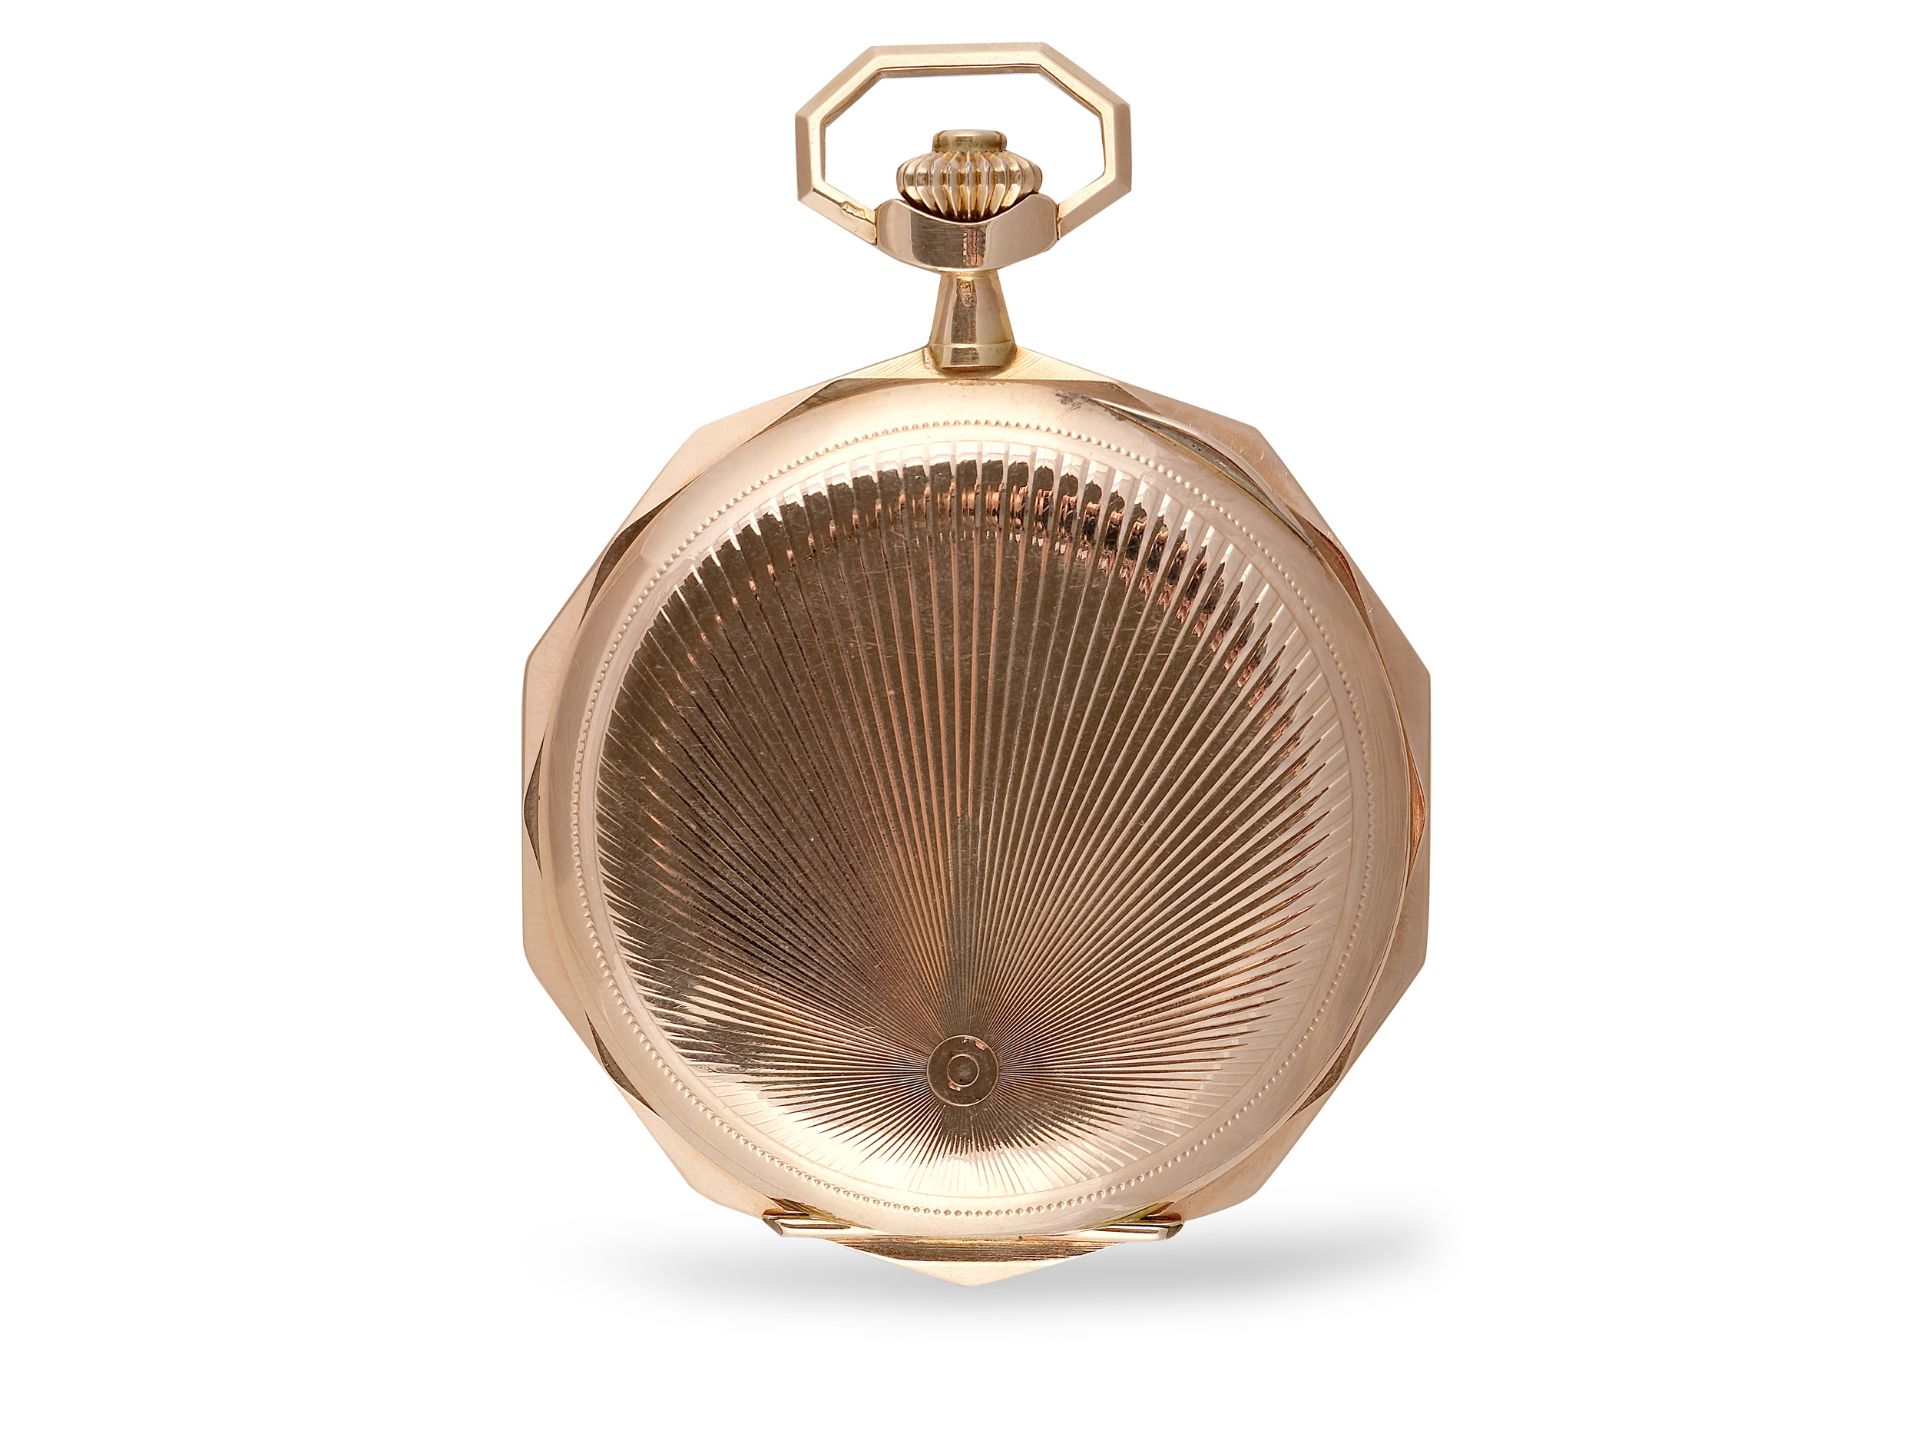 Pocket watch, 14 ct gold - Image 2 of 5